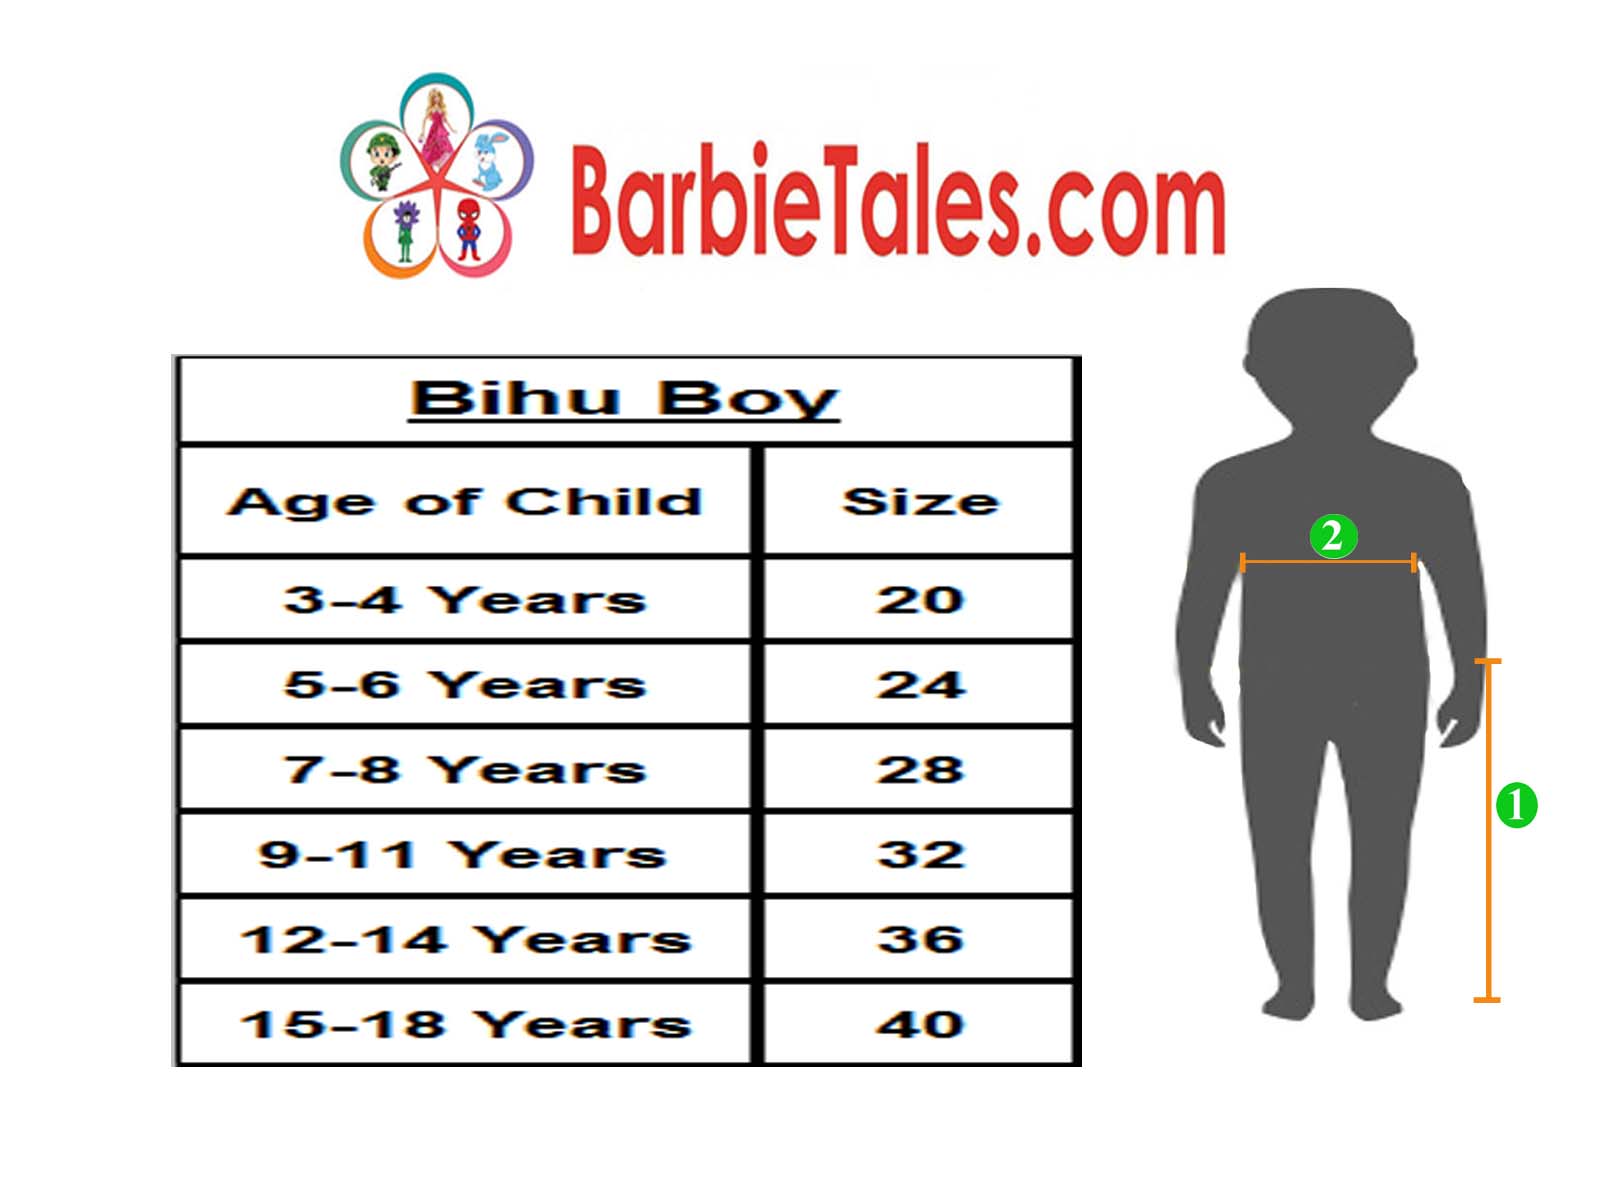 Image of Dress for 6-8 year-old boy, dress for 3-4 year-old girl,